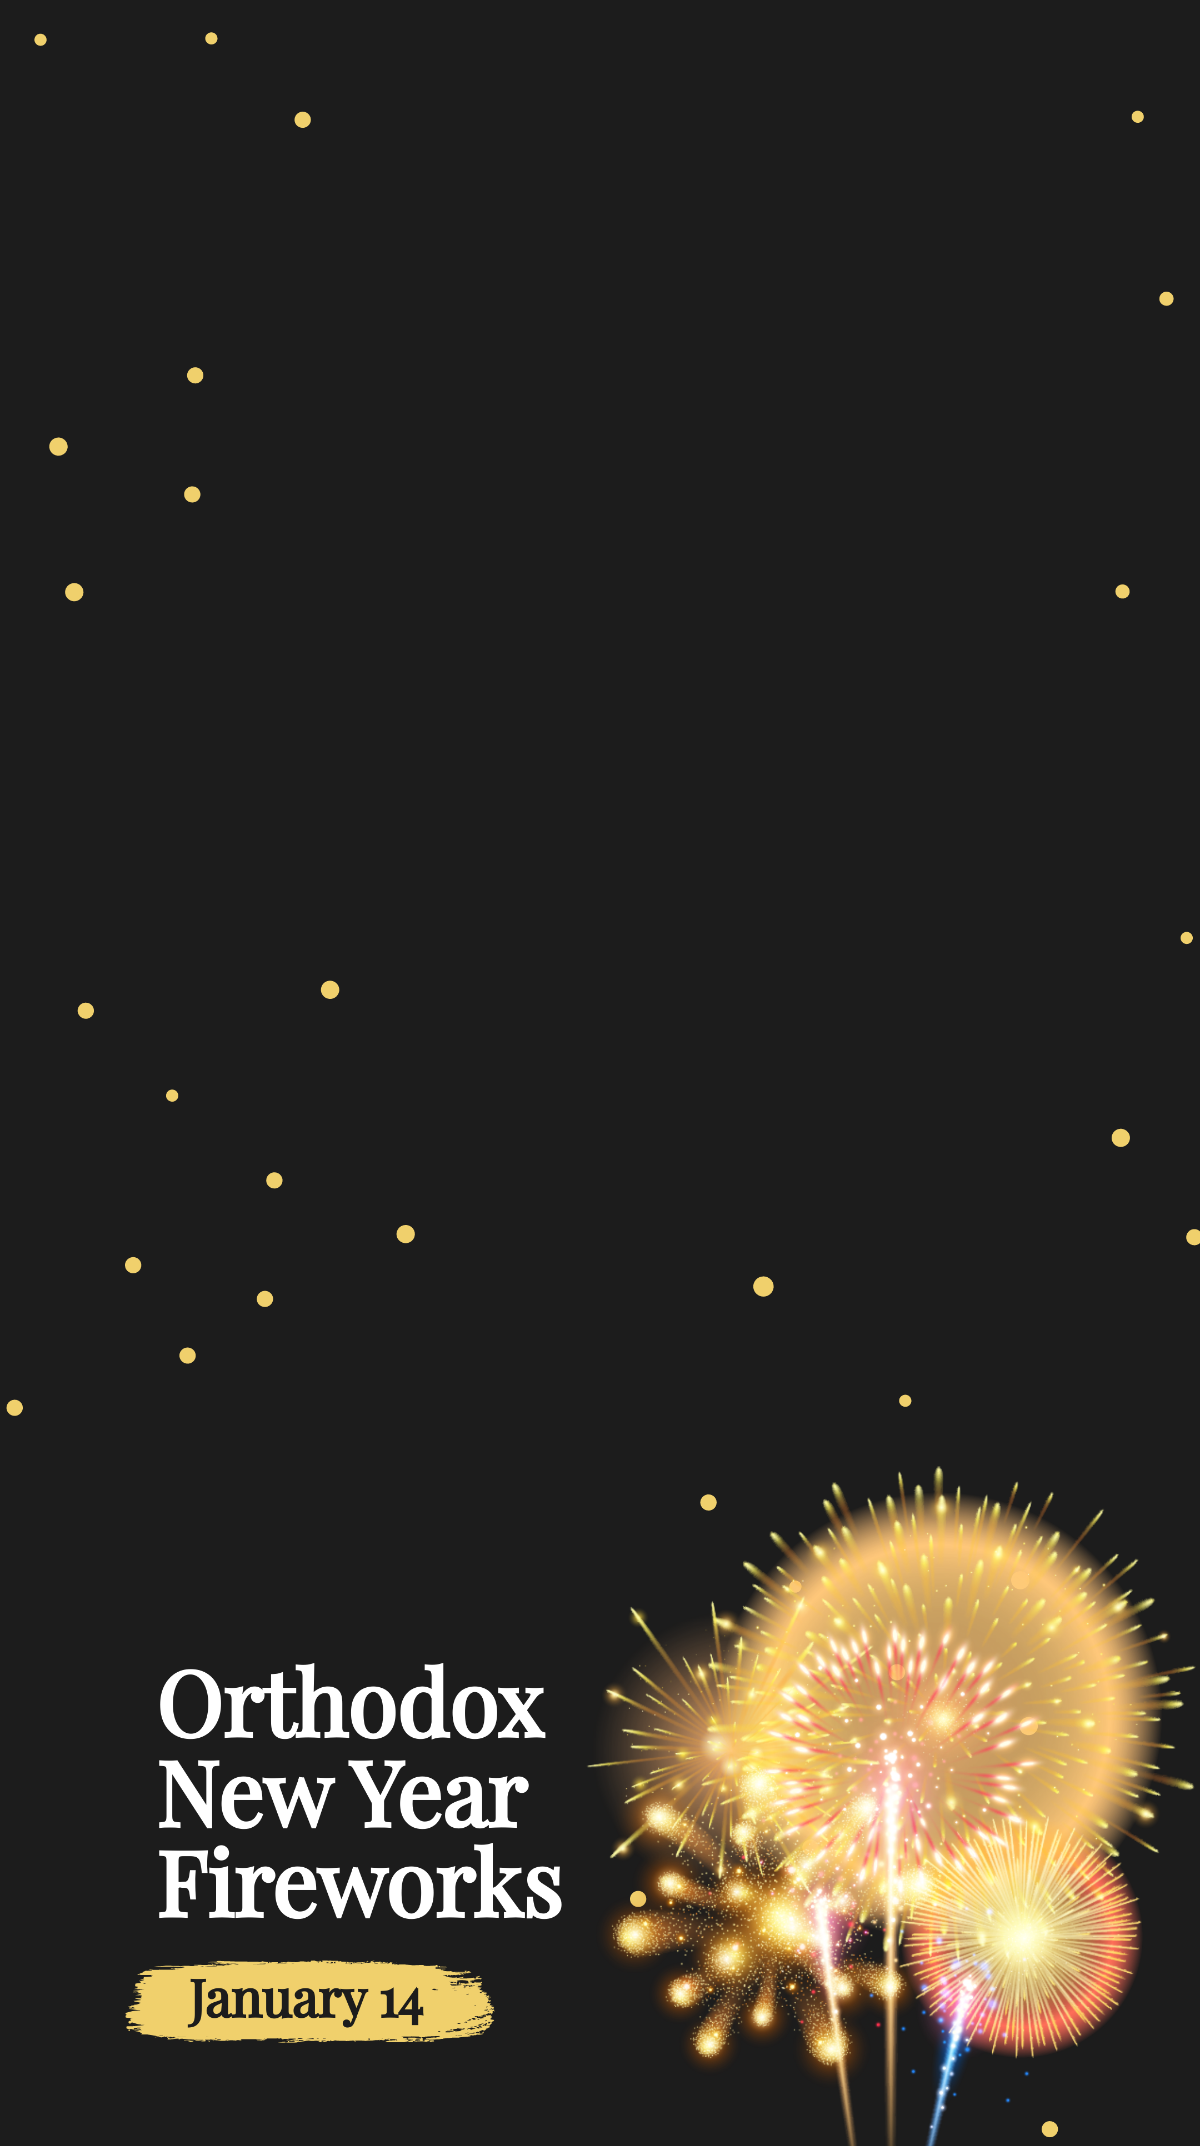 Orthodox New Year Fireworks Snapchat Geofilter Template